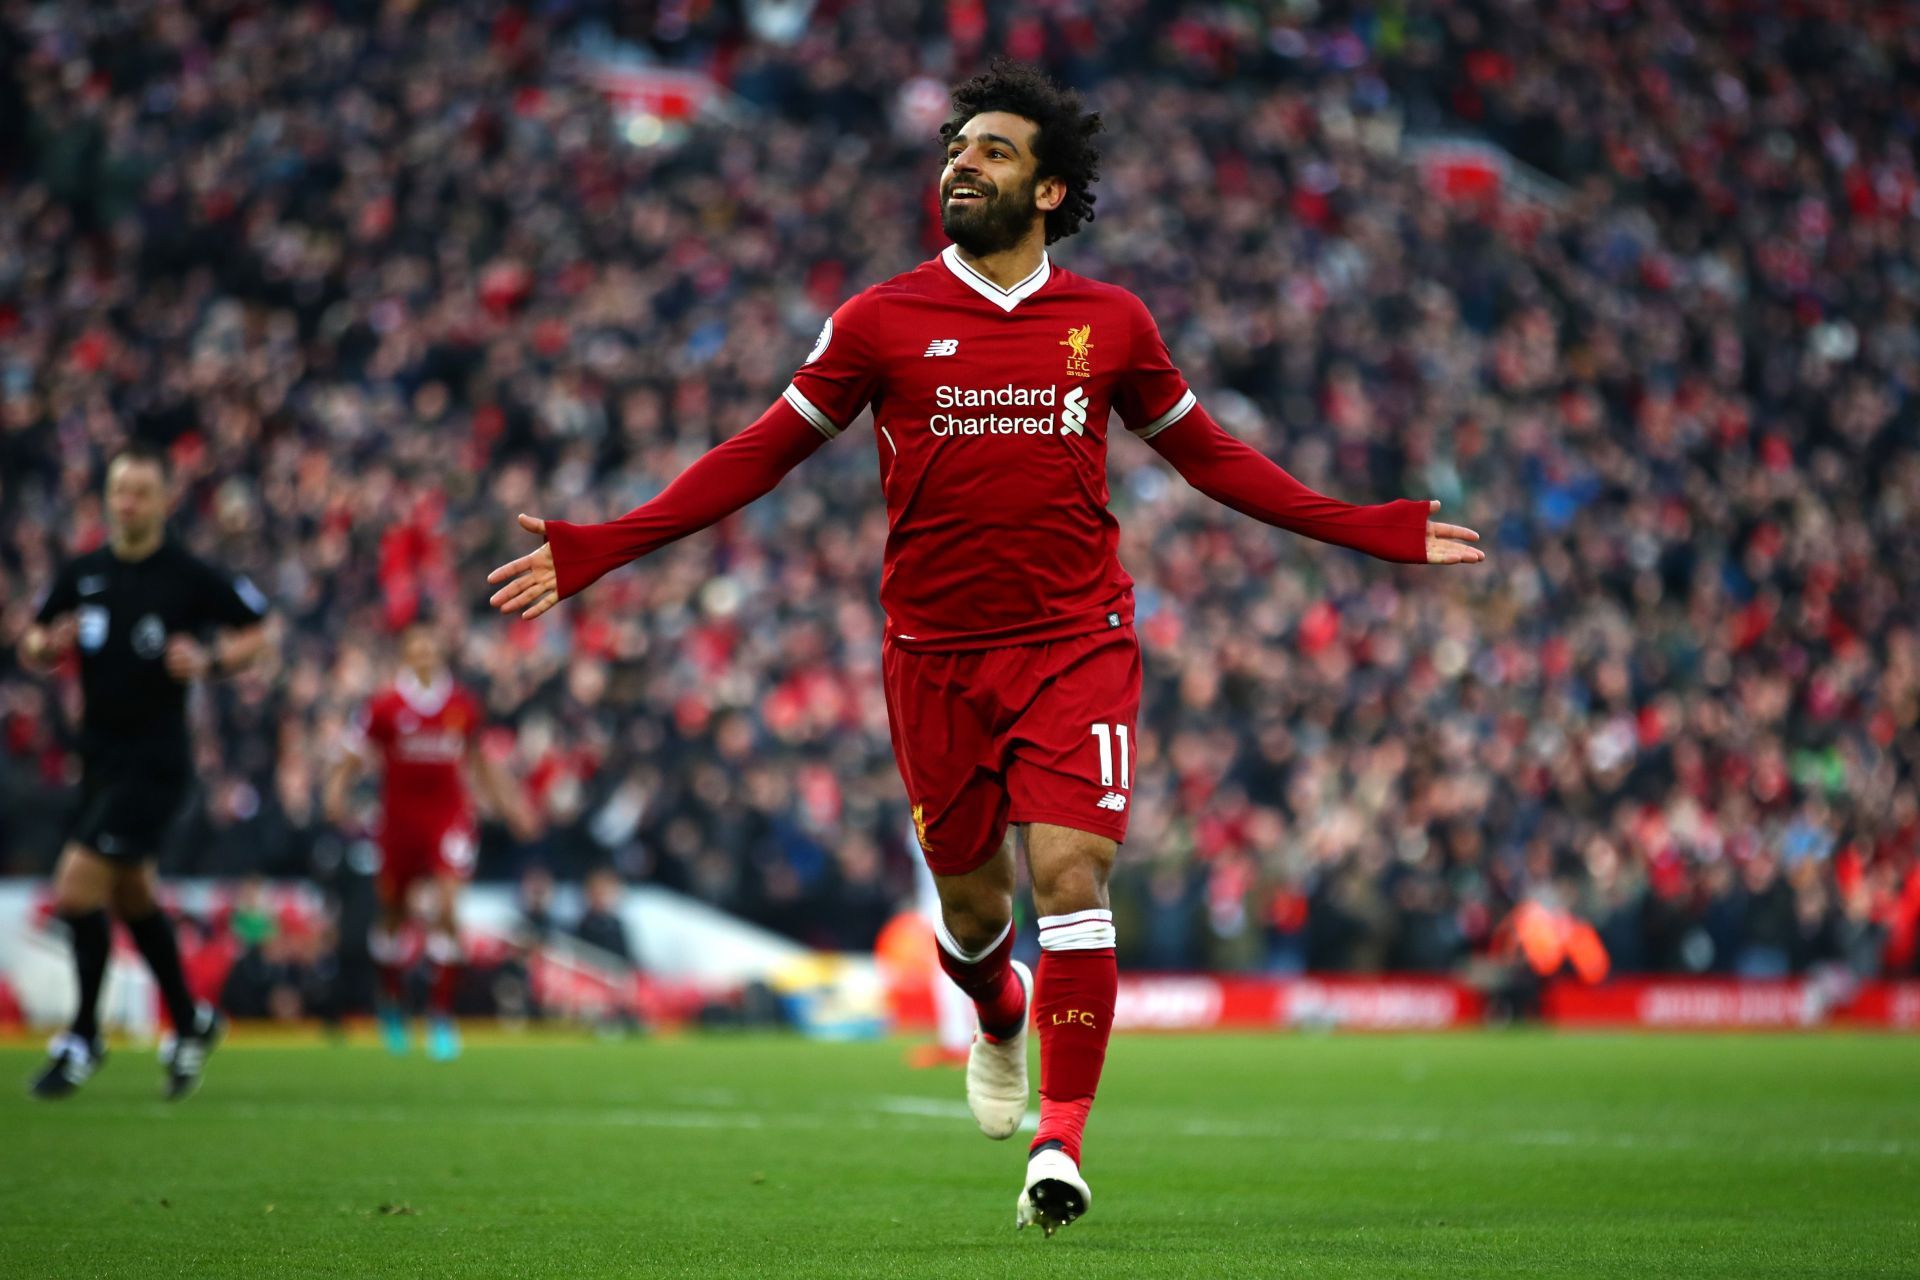 Mohamed Salah has been a goal-scoring machine in the Premier League